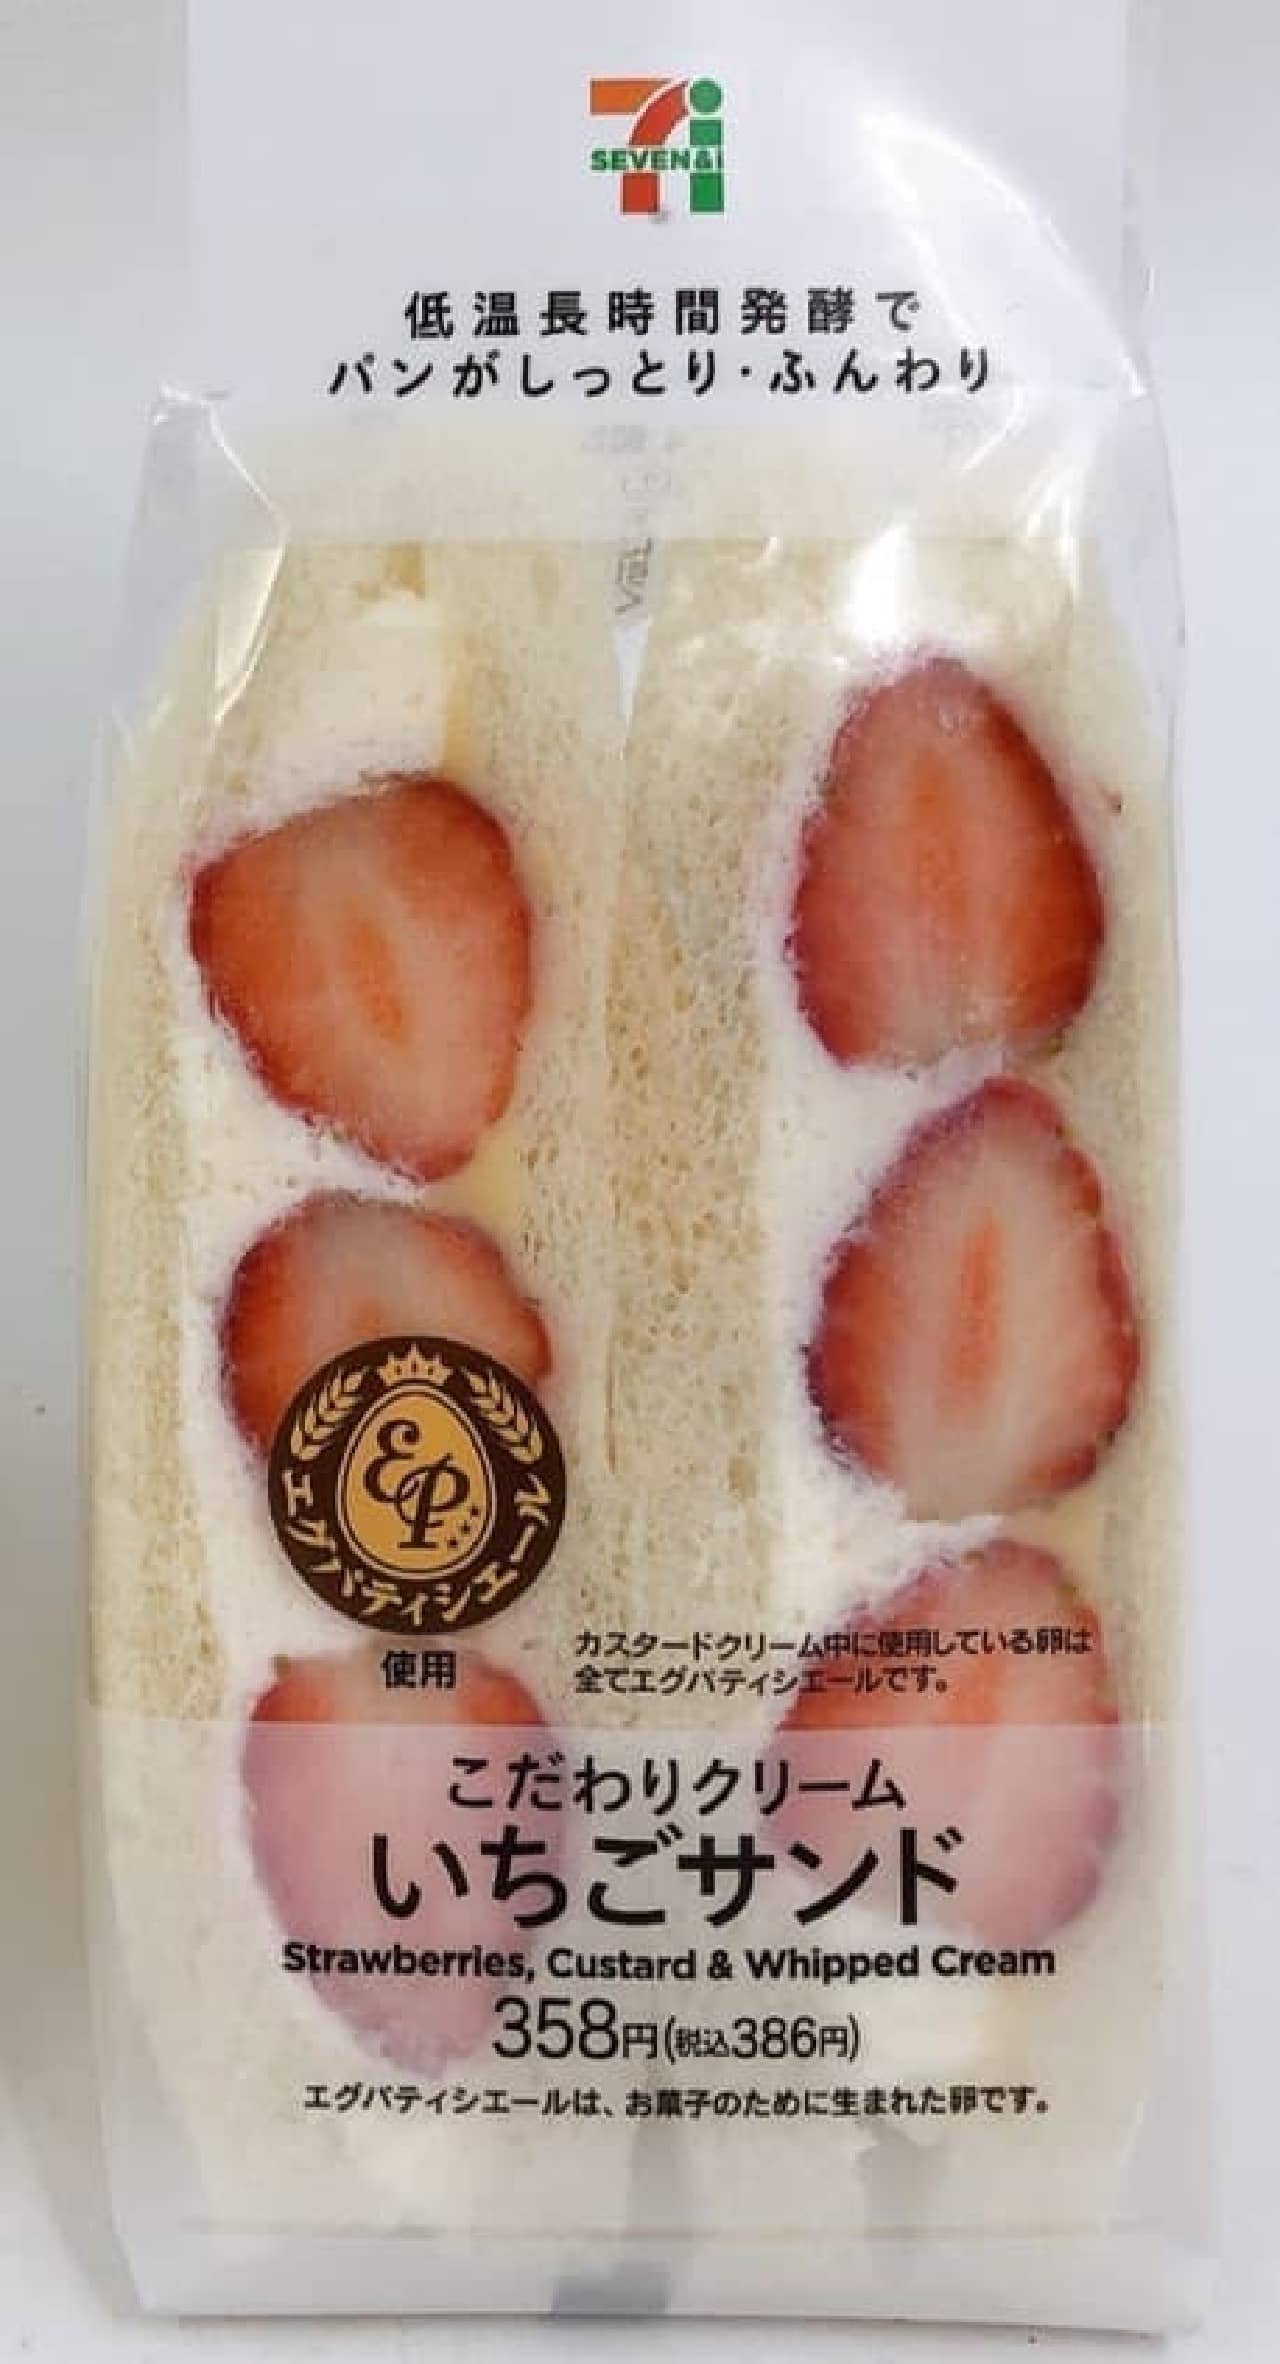 7-ELEVEN strawberry sweets